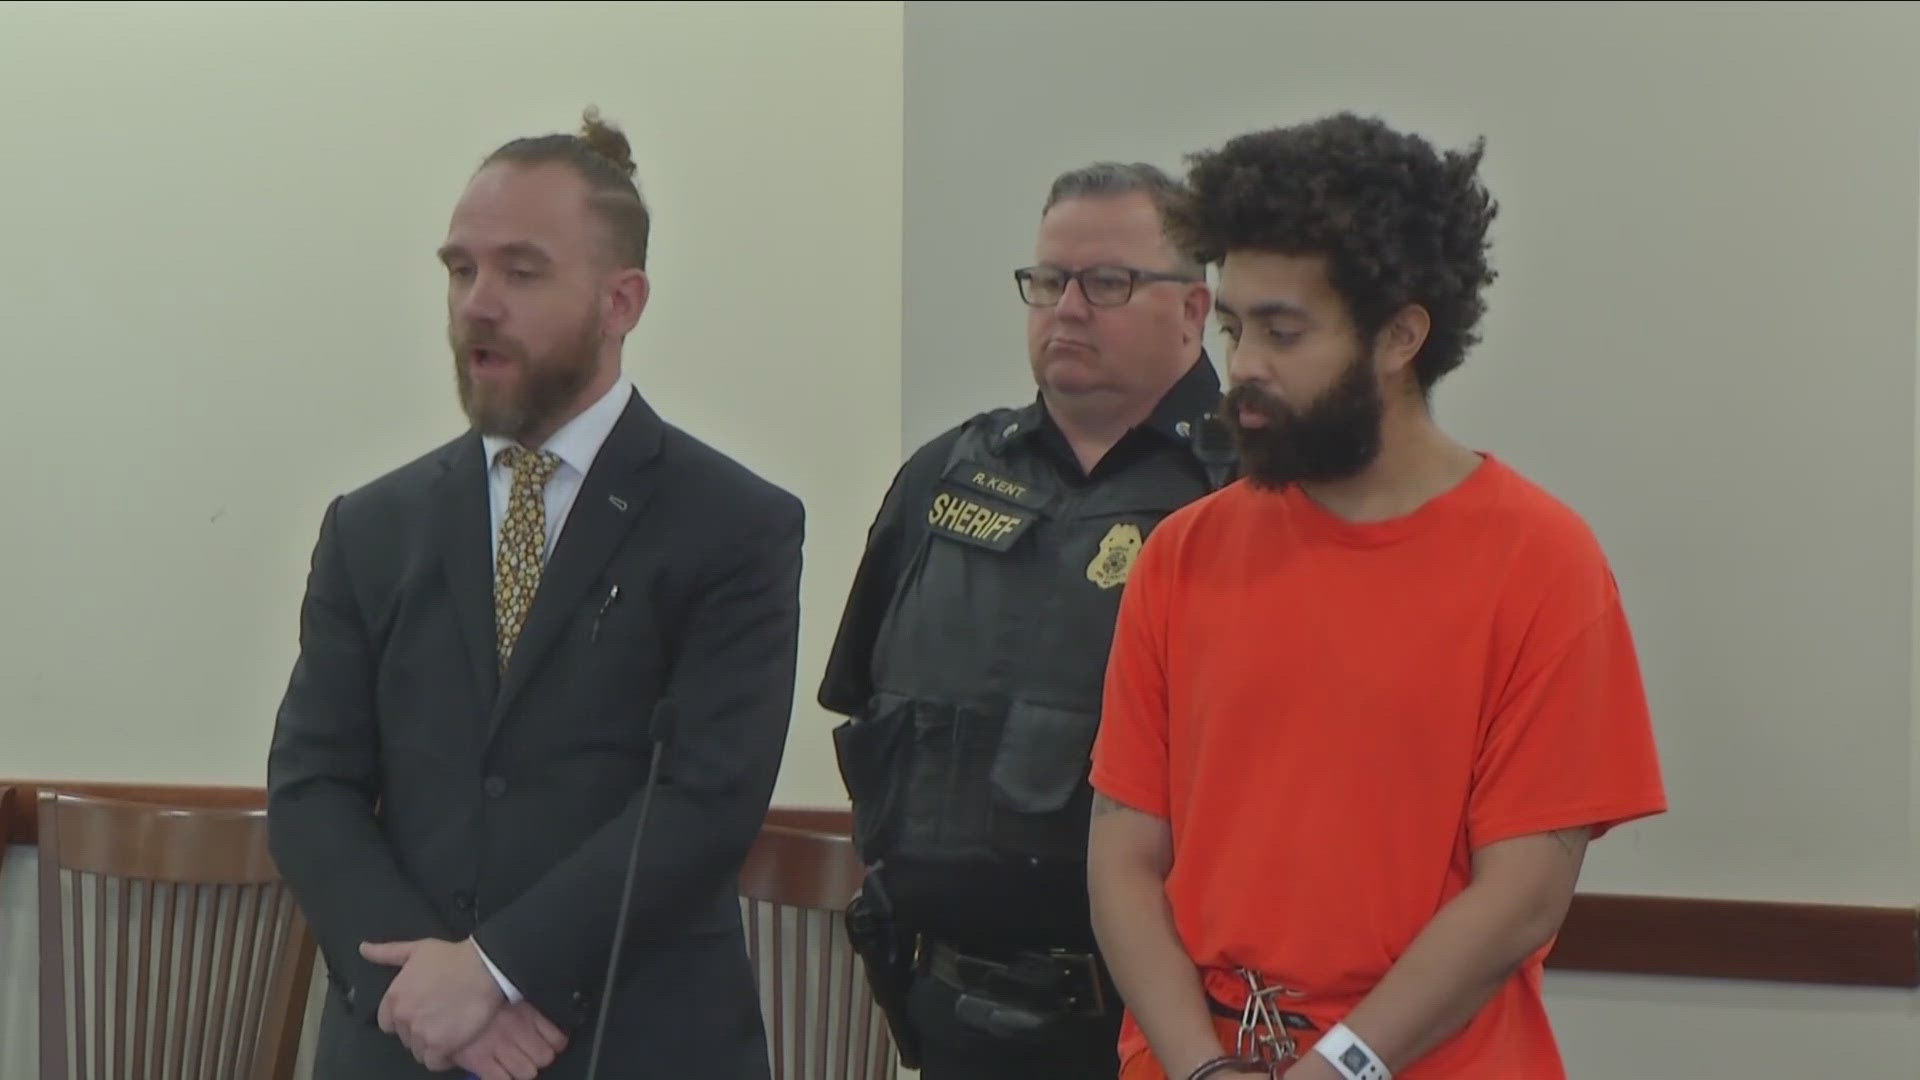 Dale O. Cummings, 31, is facing four charges in connection with the death of Babul Meah and Abu Yousef.